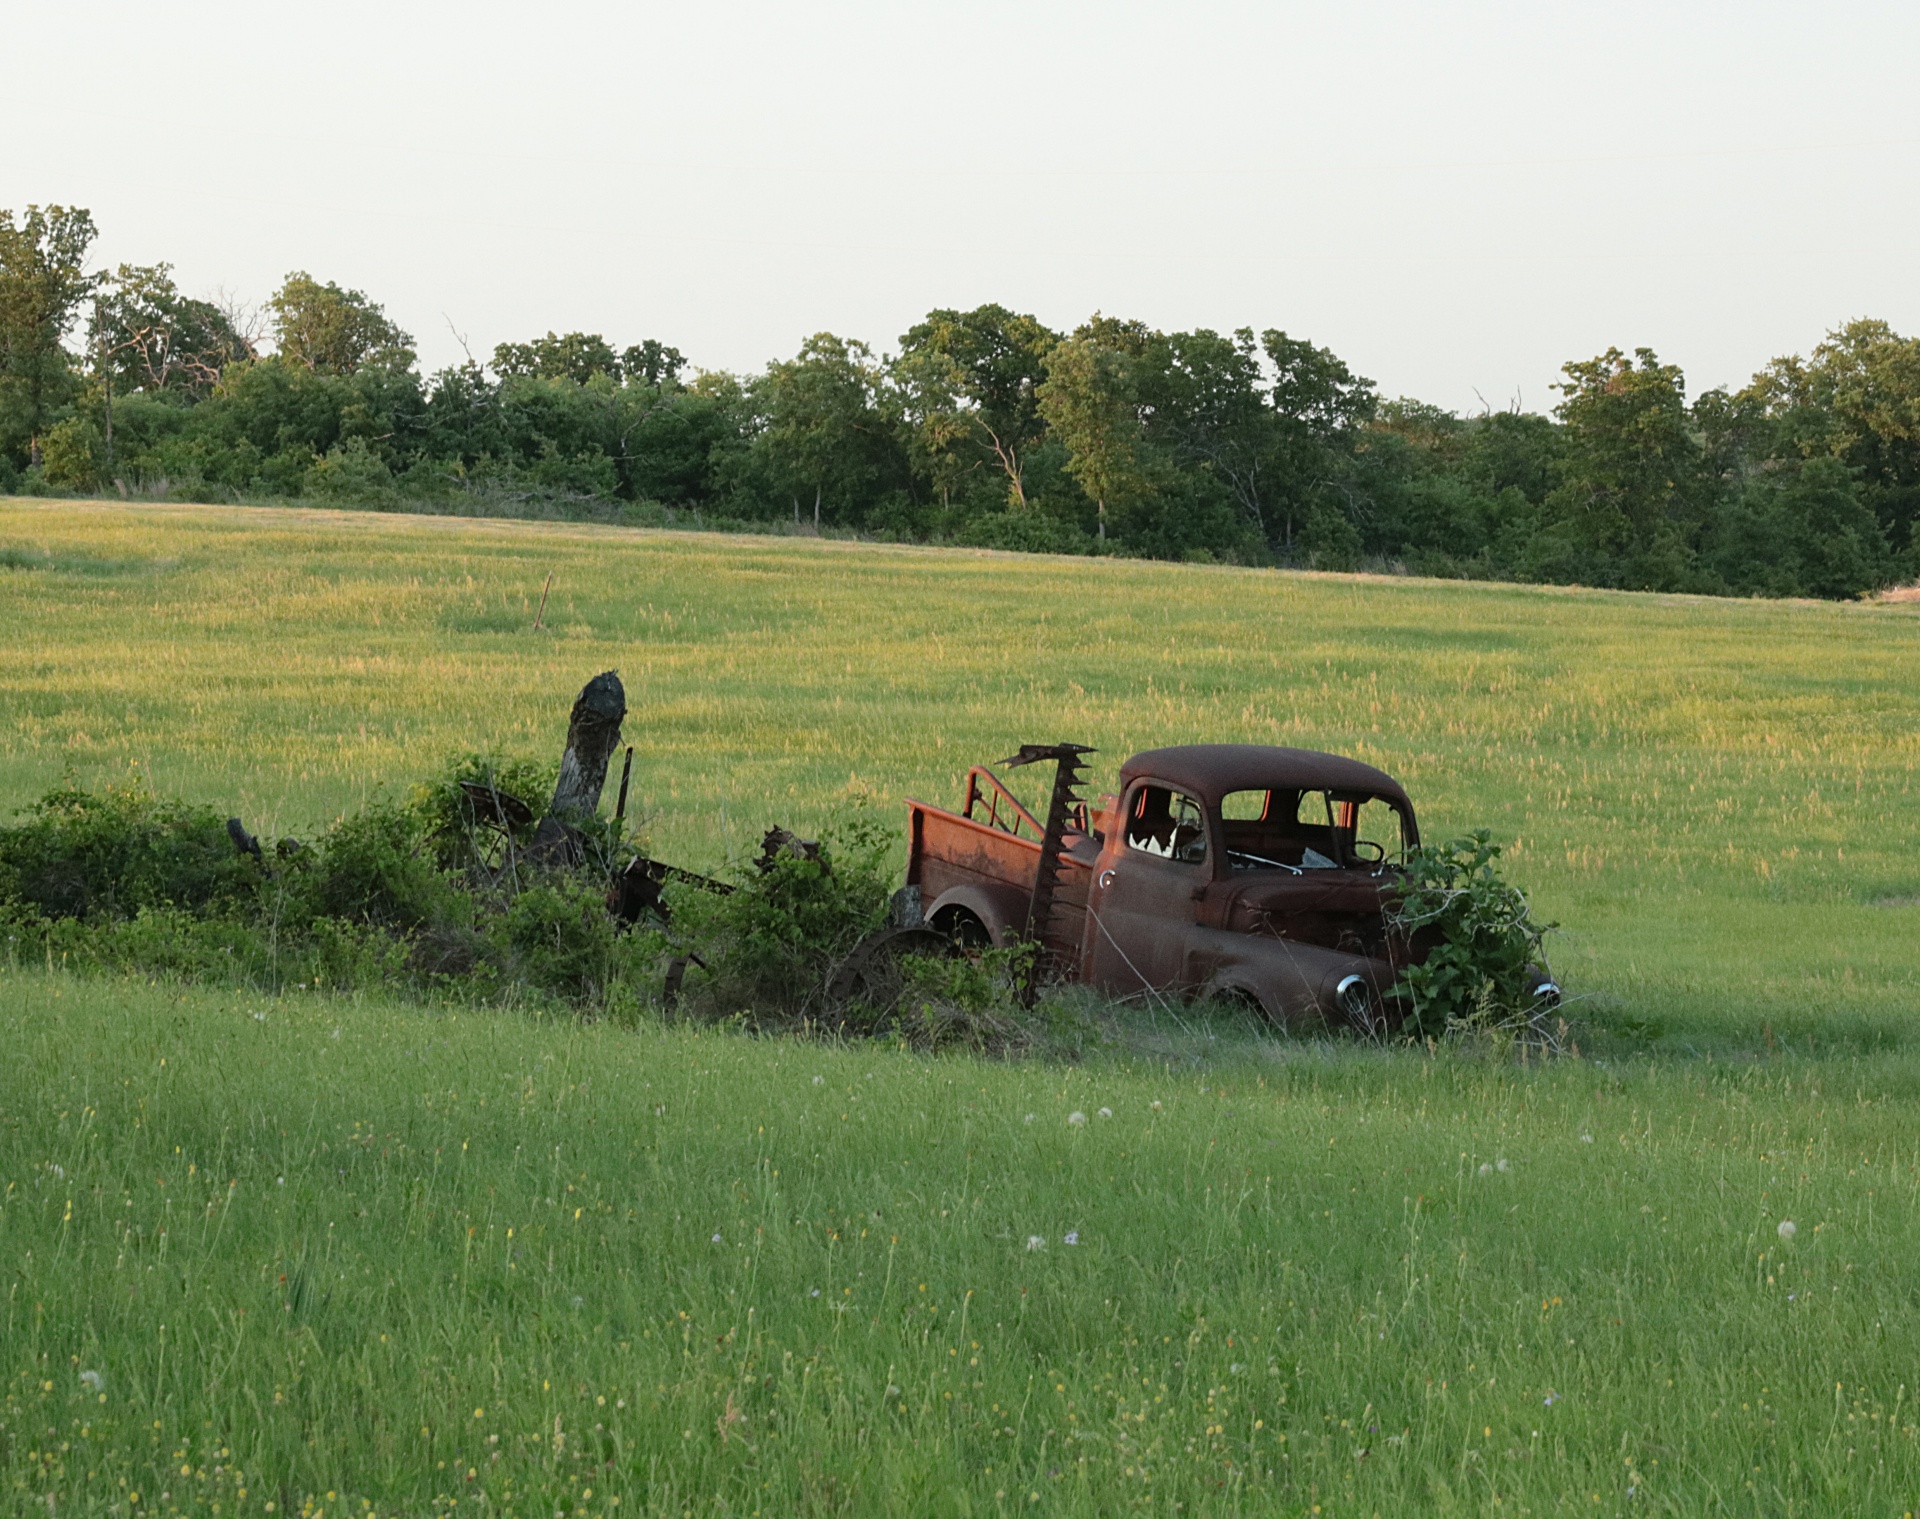 An old abandoned and rust 1955 Dodge truck sits in a green grassy Oklahoma country field with an old rusty hay sickle and other miscellaneous farm equipment, with green trees and a blue sky background.